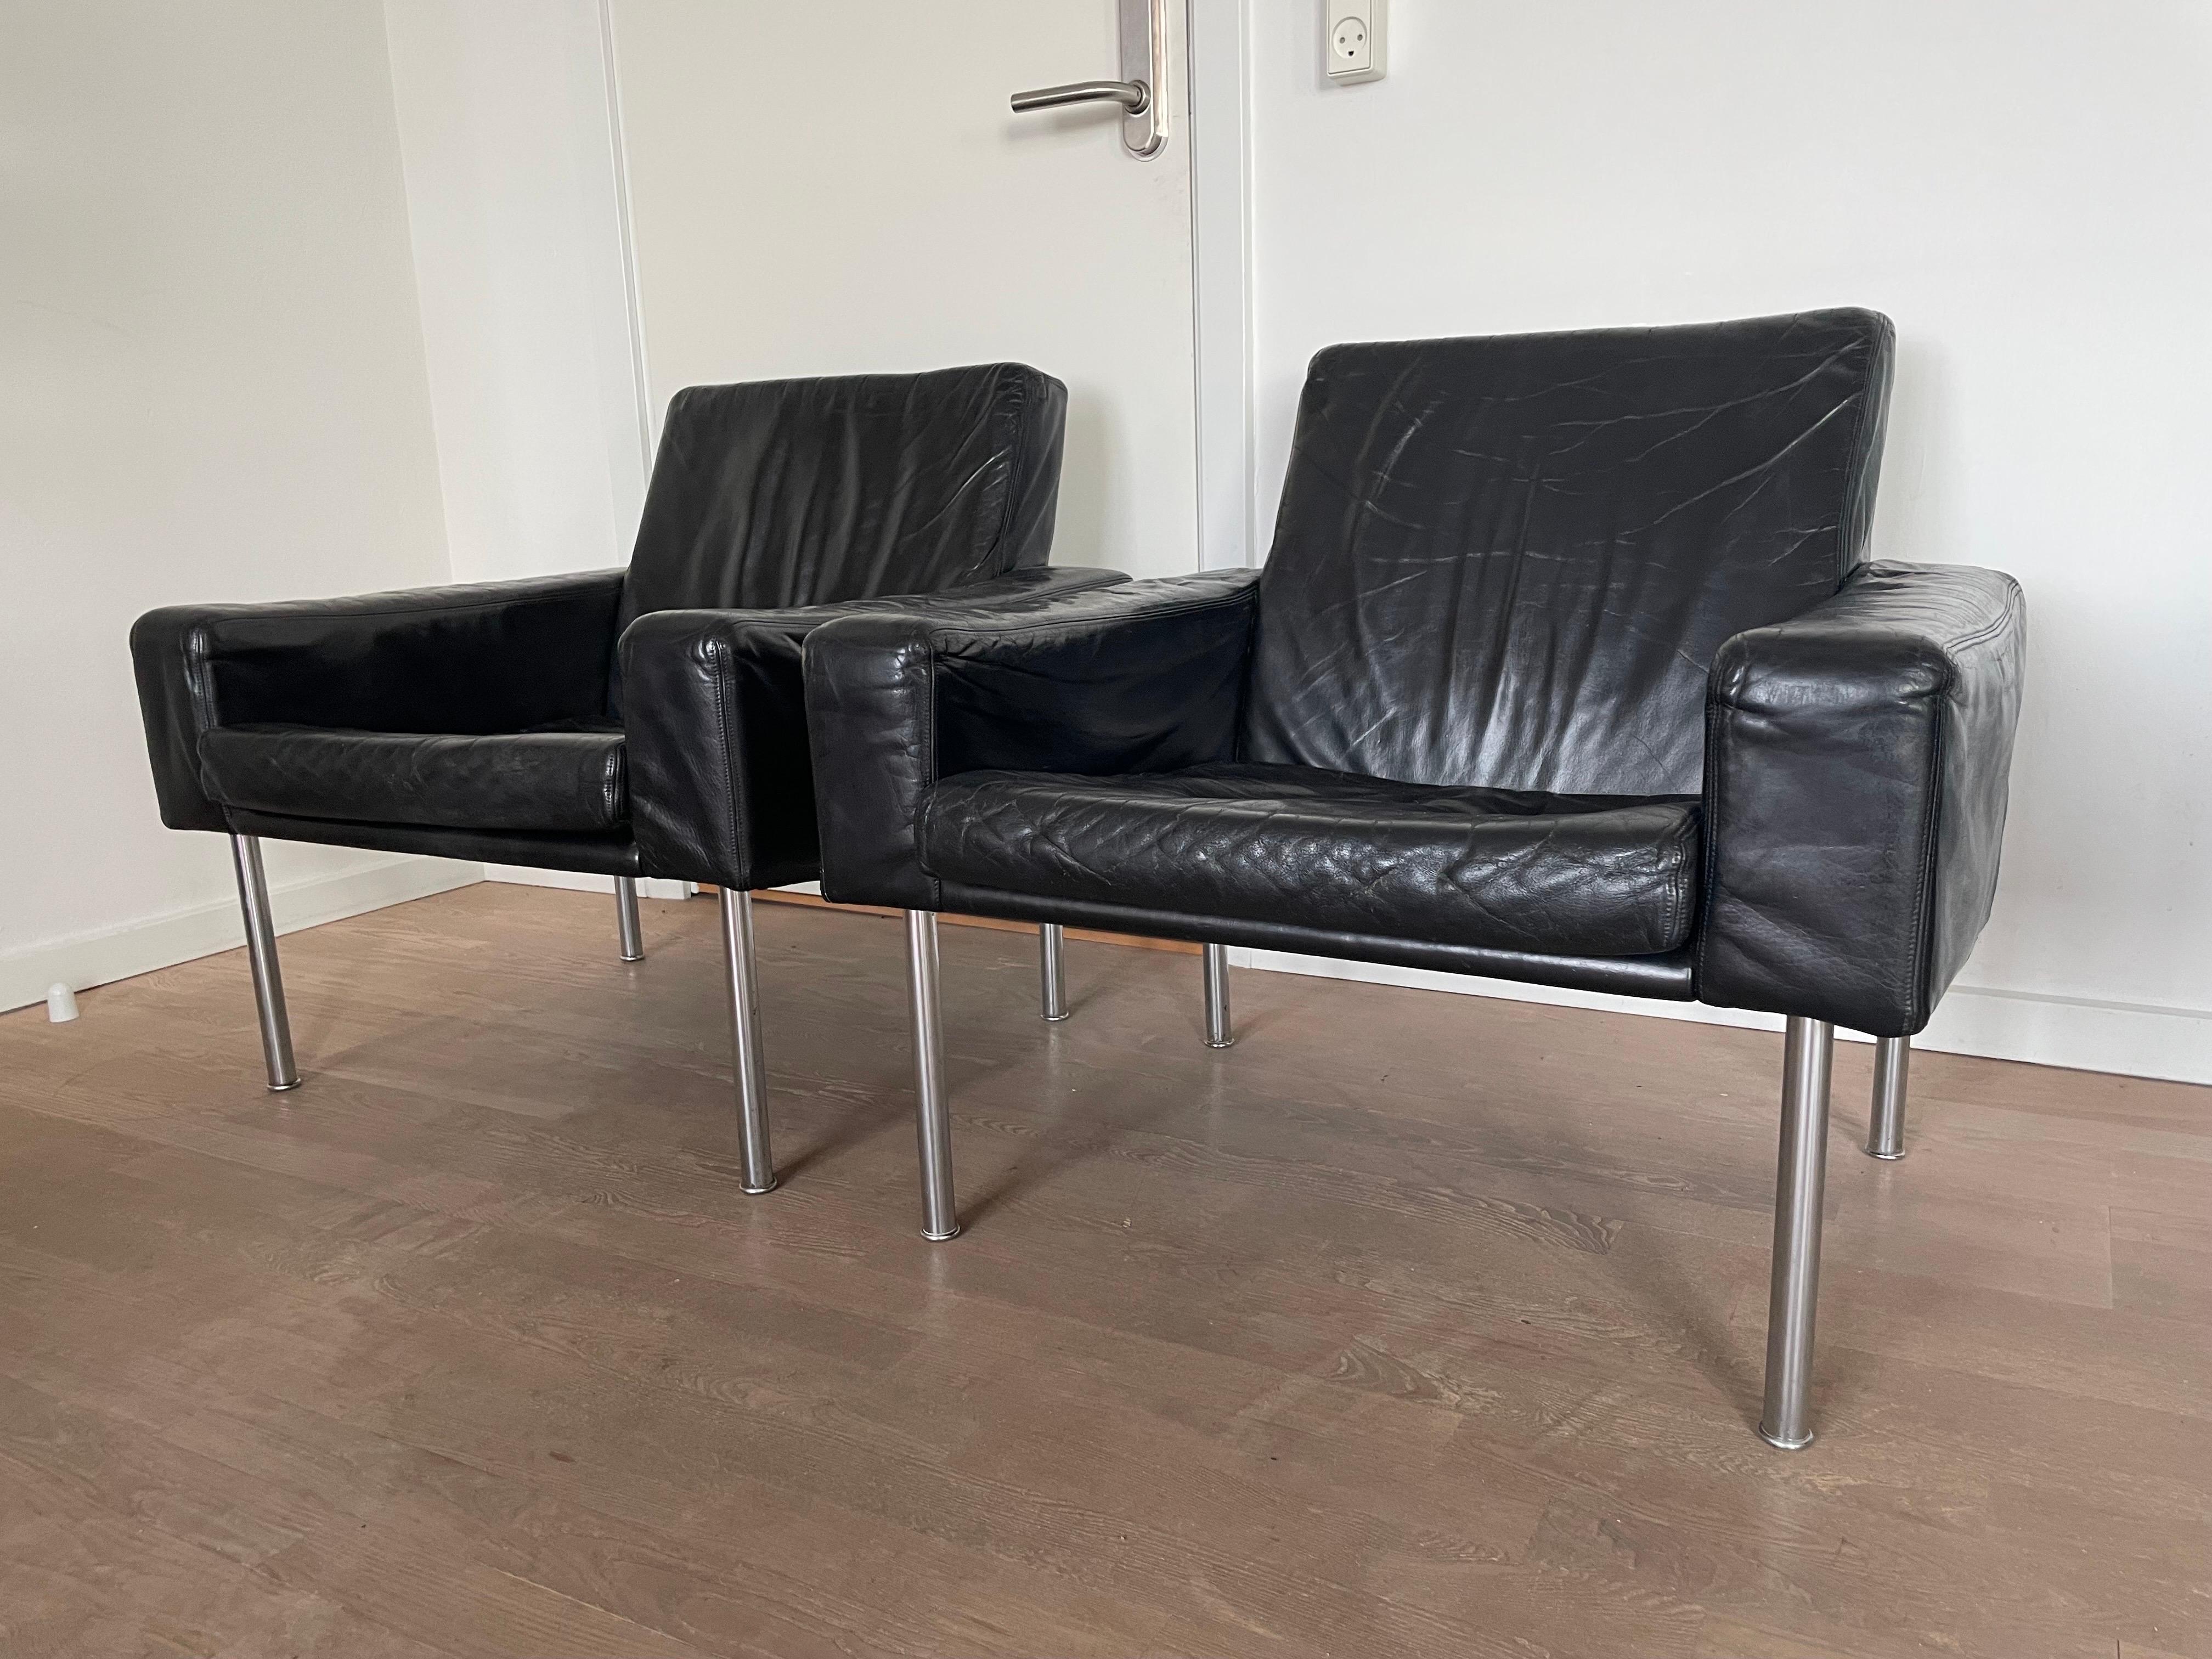 Chrome Hans Wegner Three-Seater and Set of Chairs for the 